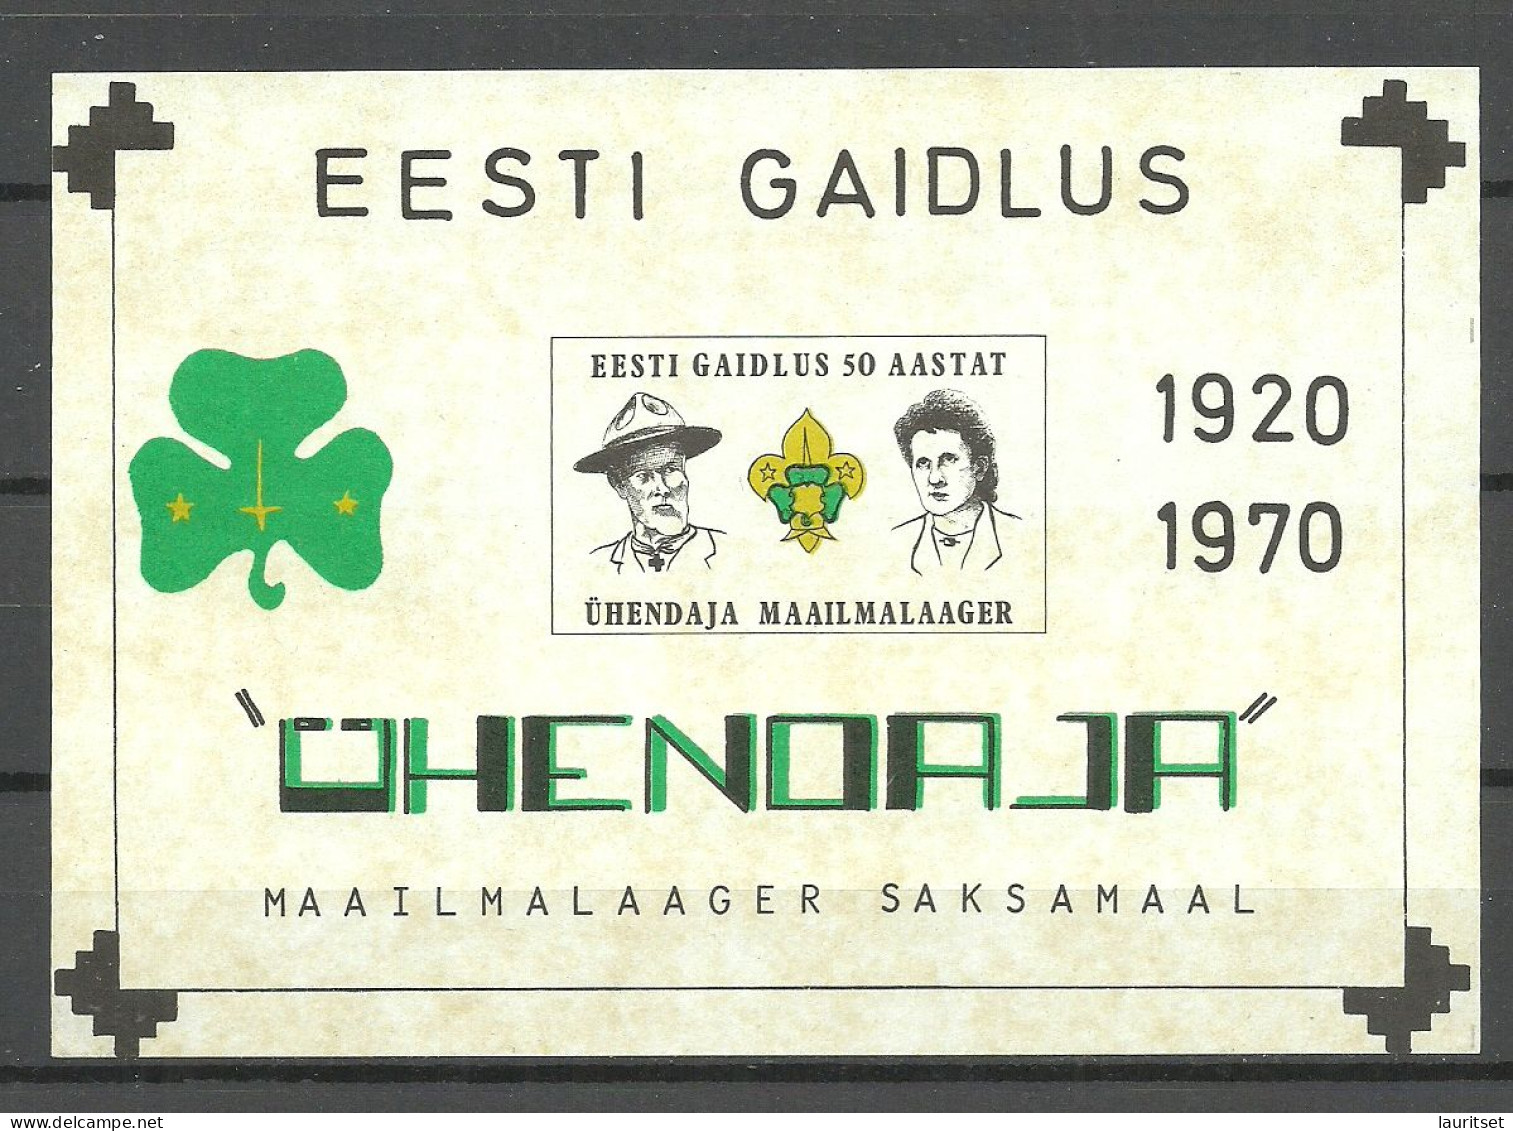 ESTLAND Estonia 1970 Guids Girl Scouts Scouting Lager In Germany Souvenir Sheet MNH NB! Som Toning - Unused Stamps